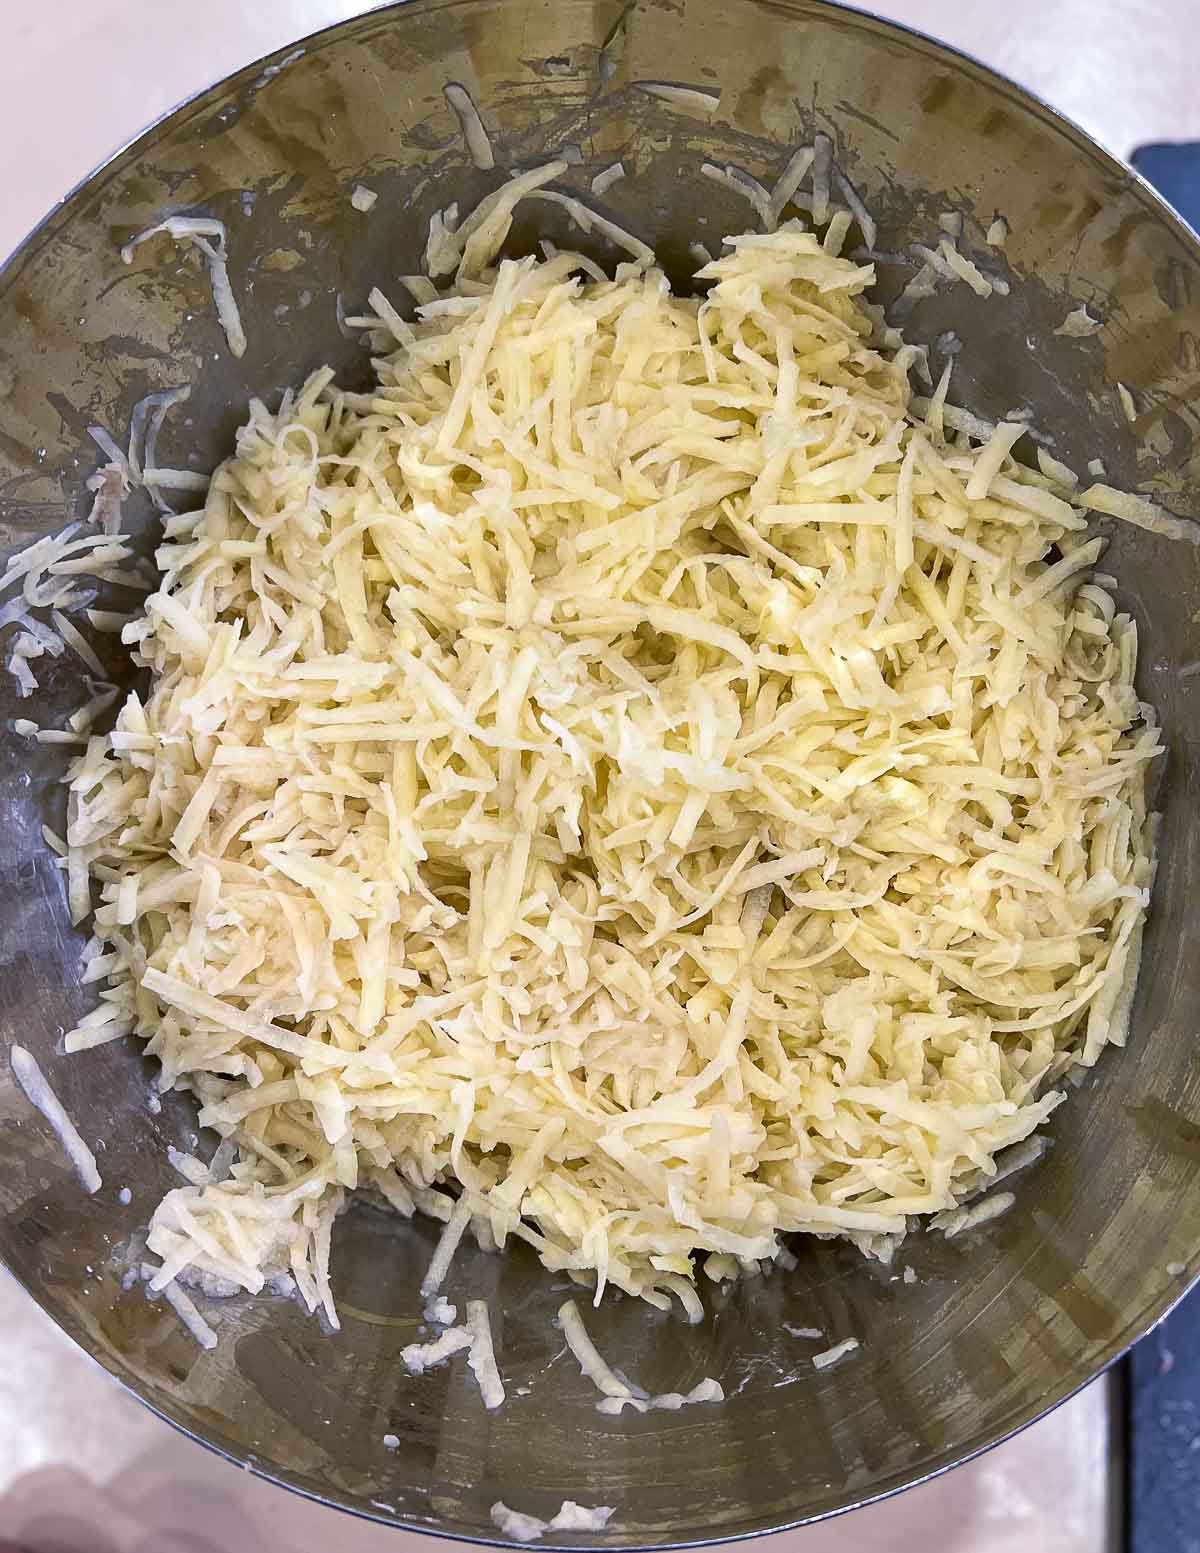 Grated potatoes in a bowl.